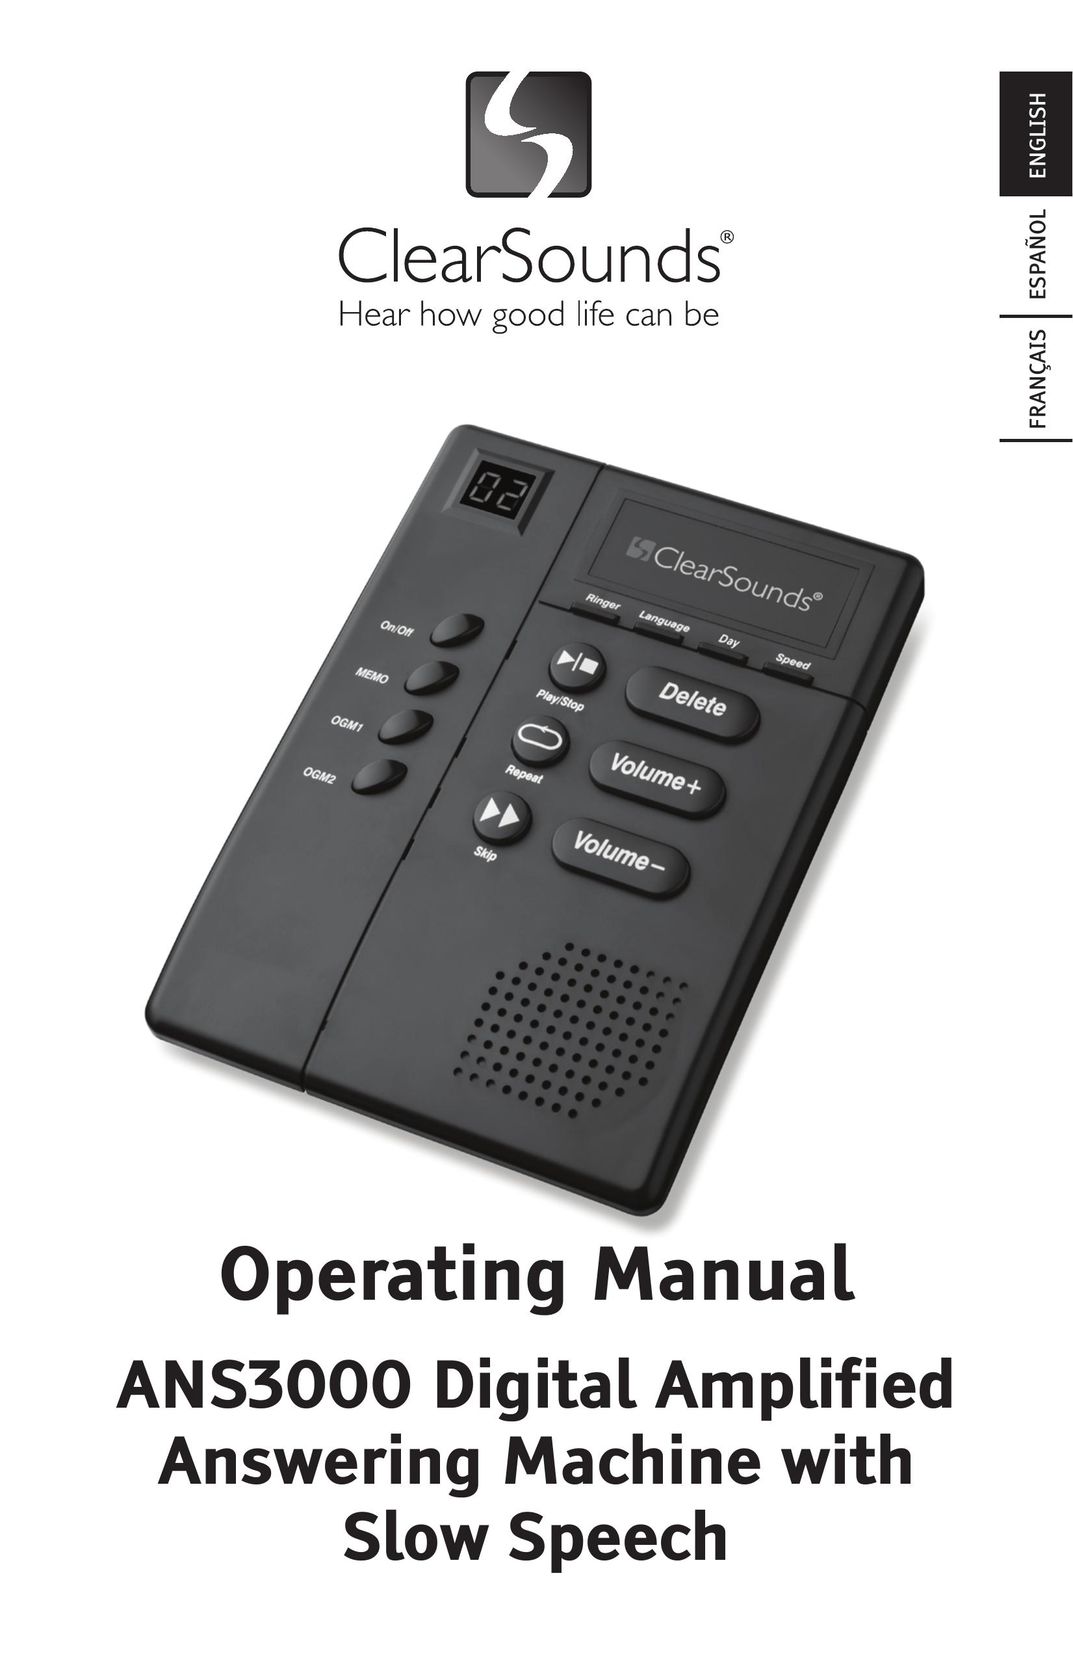 ClearSounds ANS3000 Answering Machine User Manual